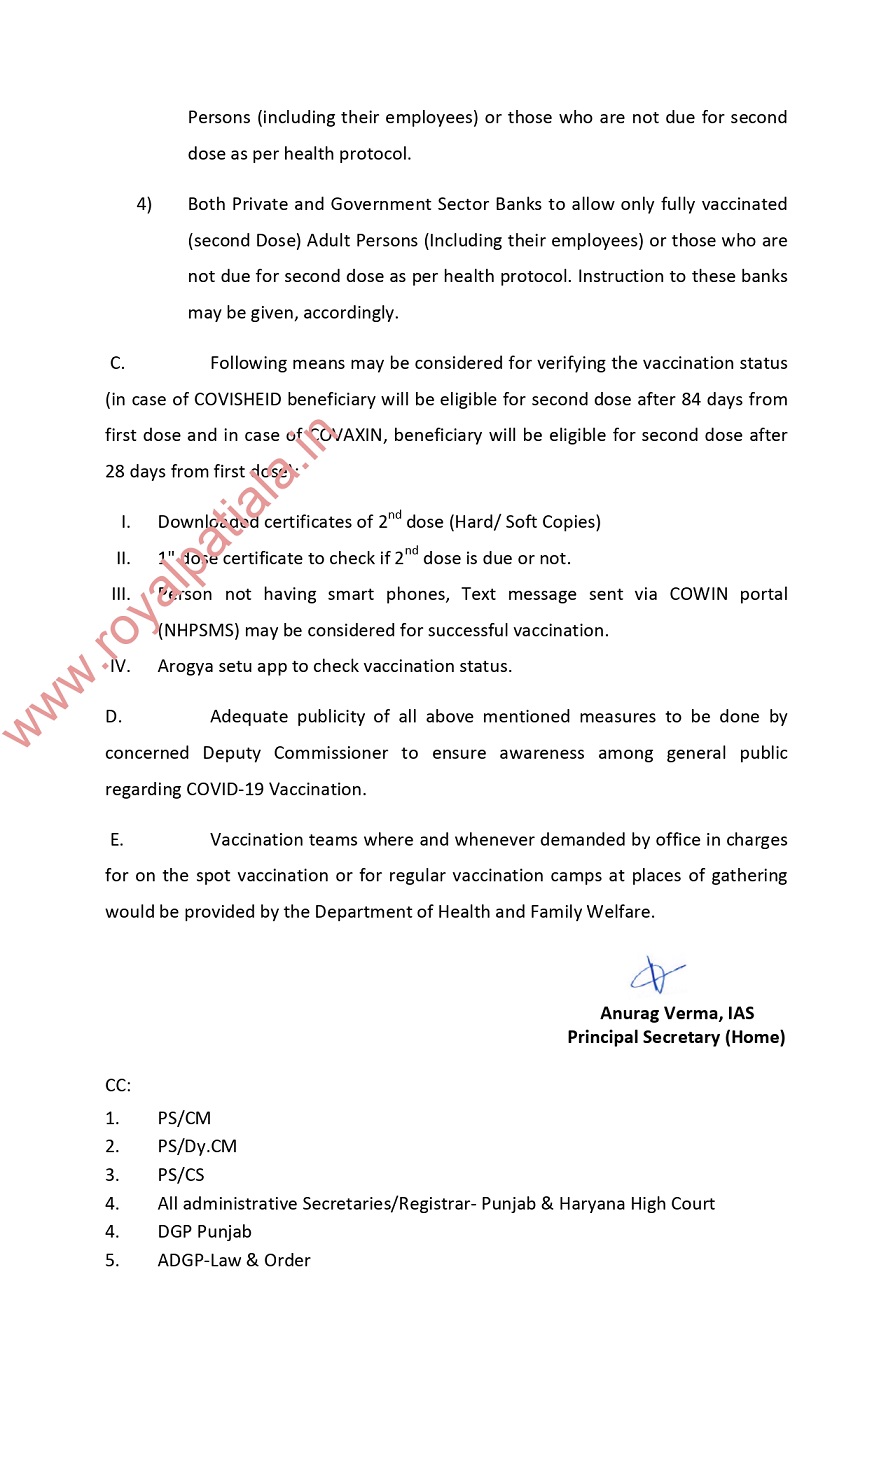 New COVID instructions issued by Punjab government